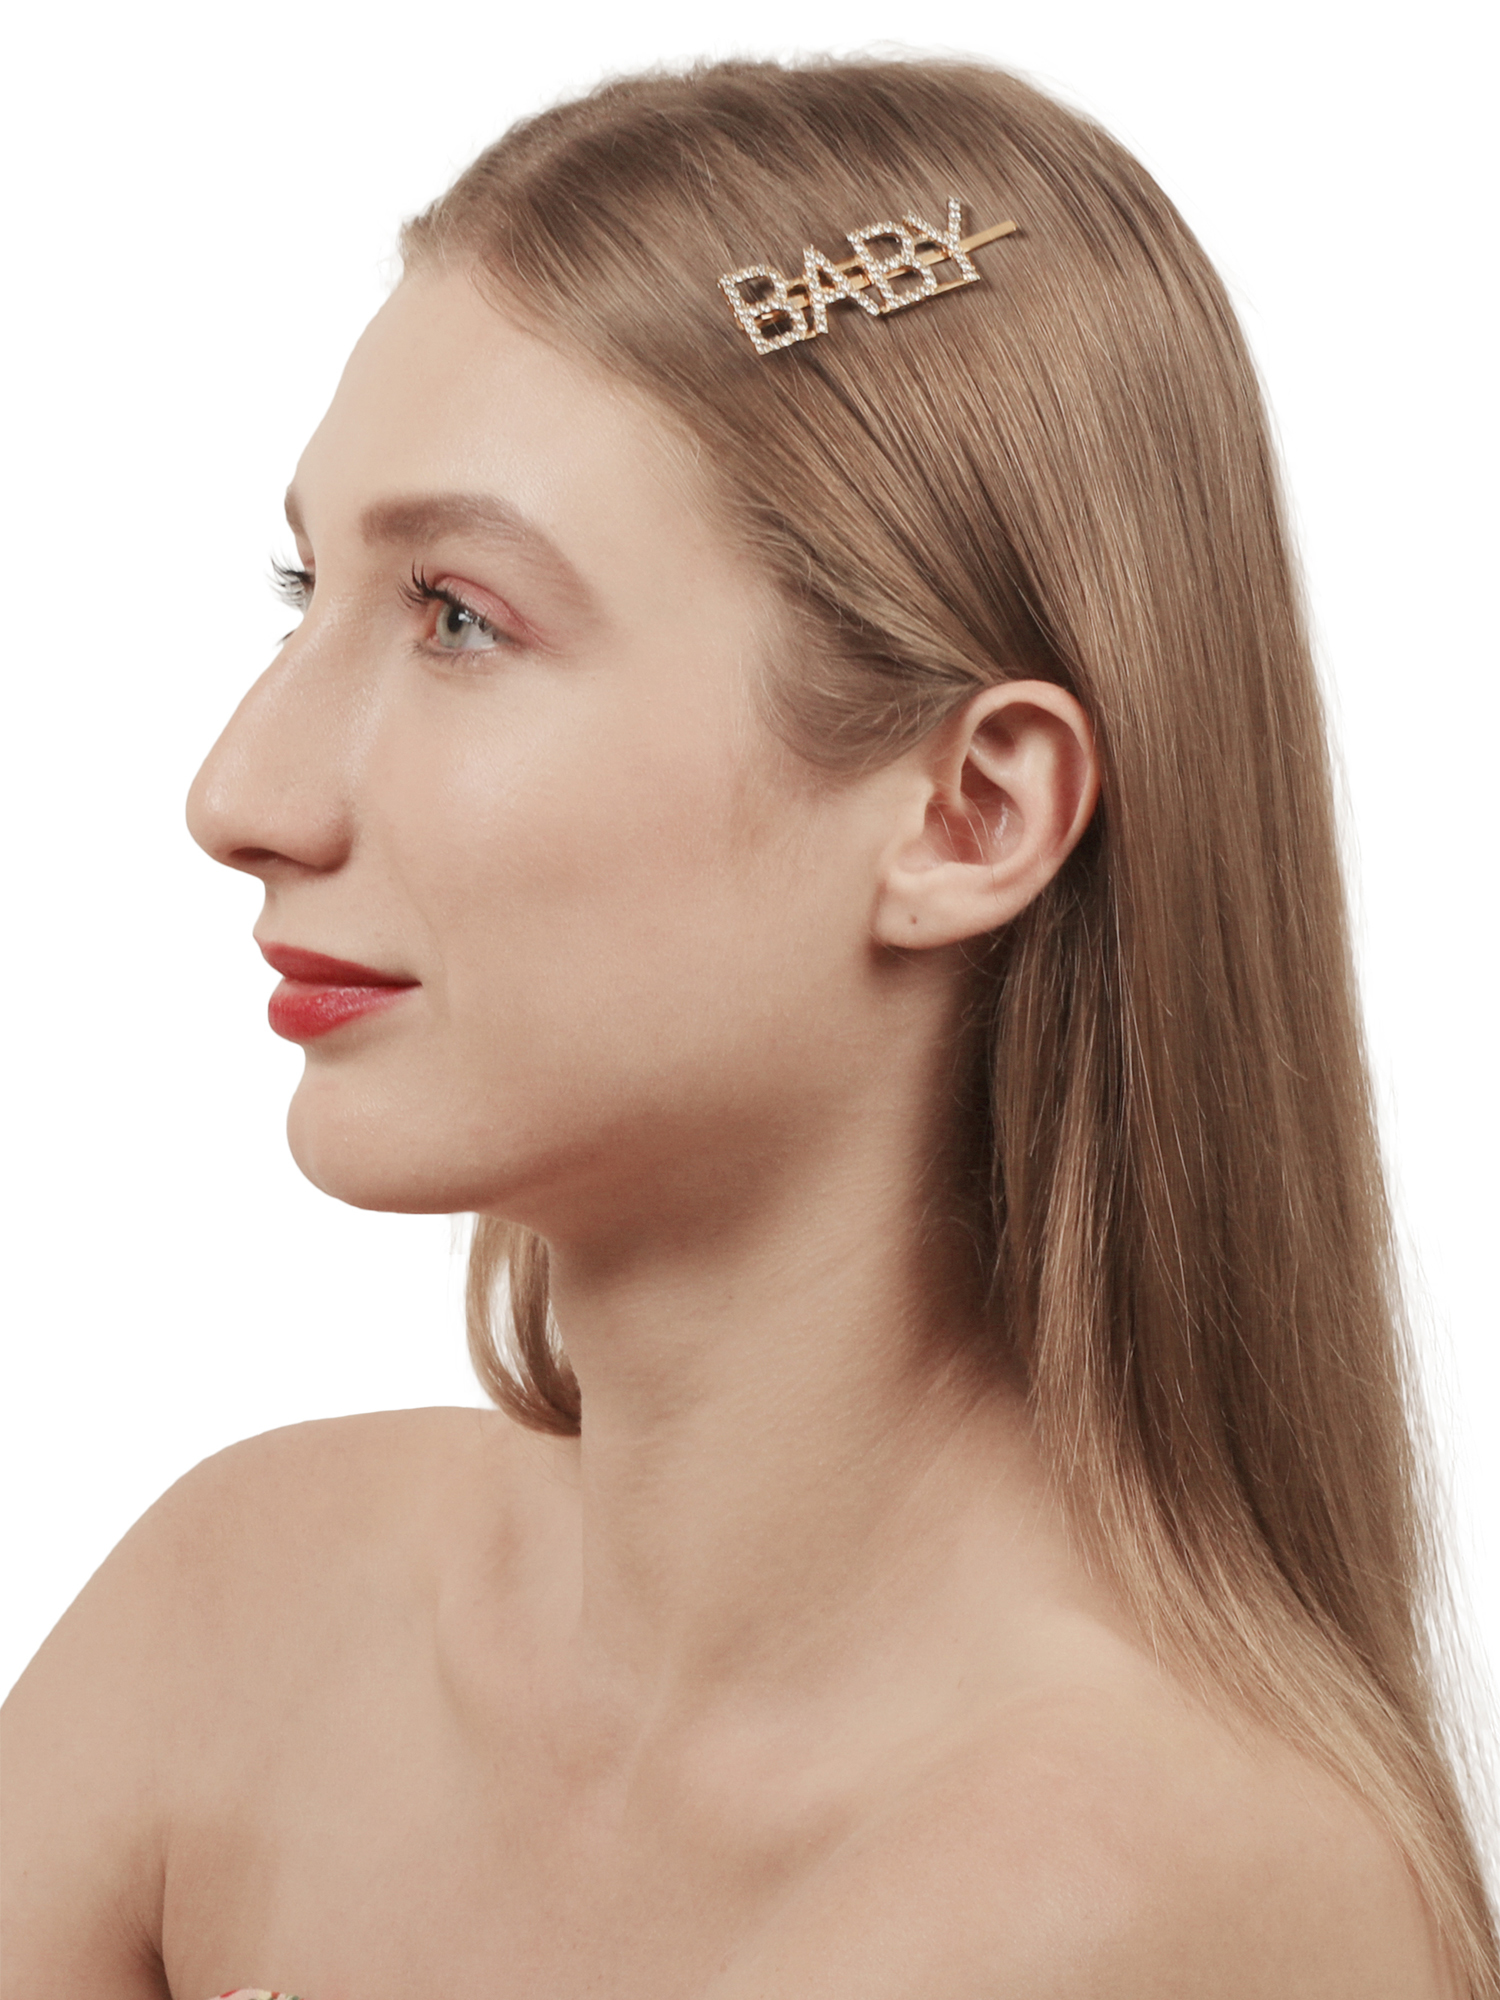 Vembley Stylish Golden Baby Word Hairclip For Women and Girls